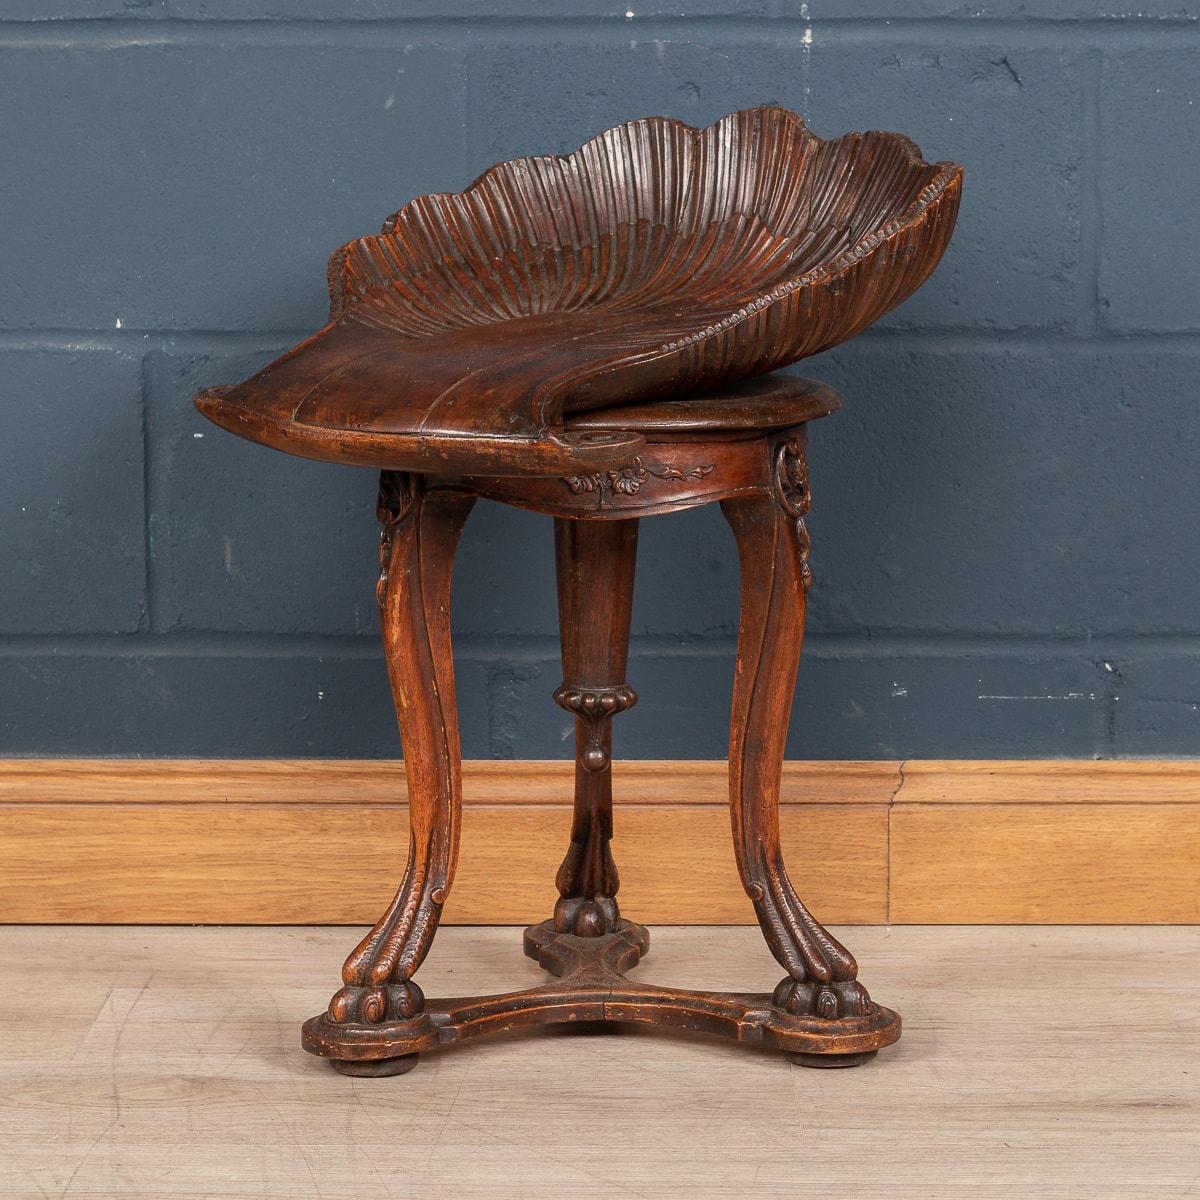 A beautiful carved antique fruitwood grotto stool, the bench standing on cabriole legs joined with a bottom stretcher, and bun feet reminiscent of animal paws, made in Venice around the turn of the 19th century.

Condition
In Great Condition -